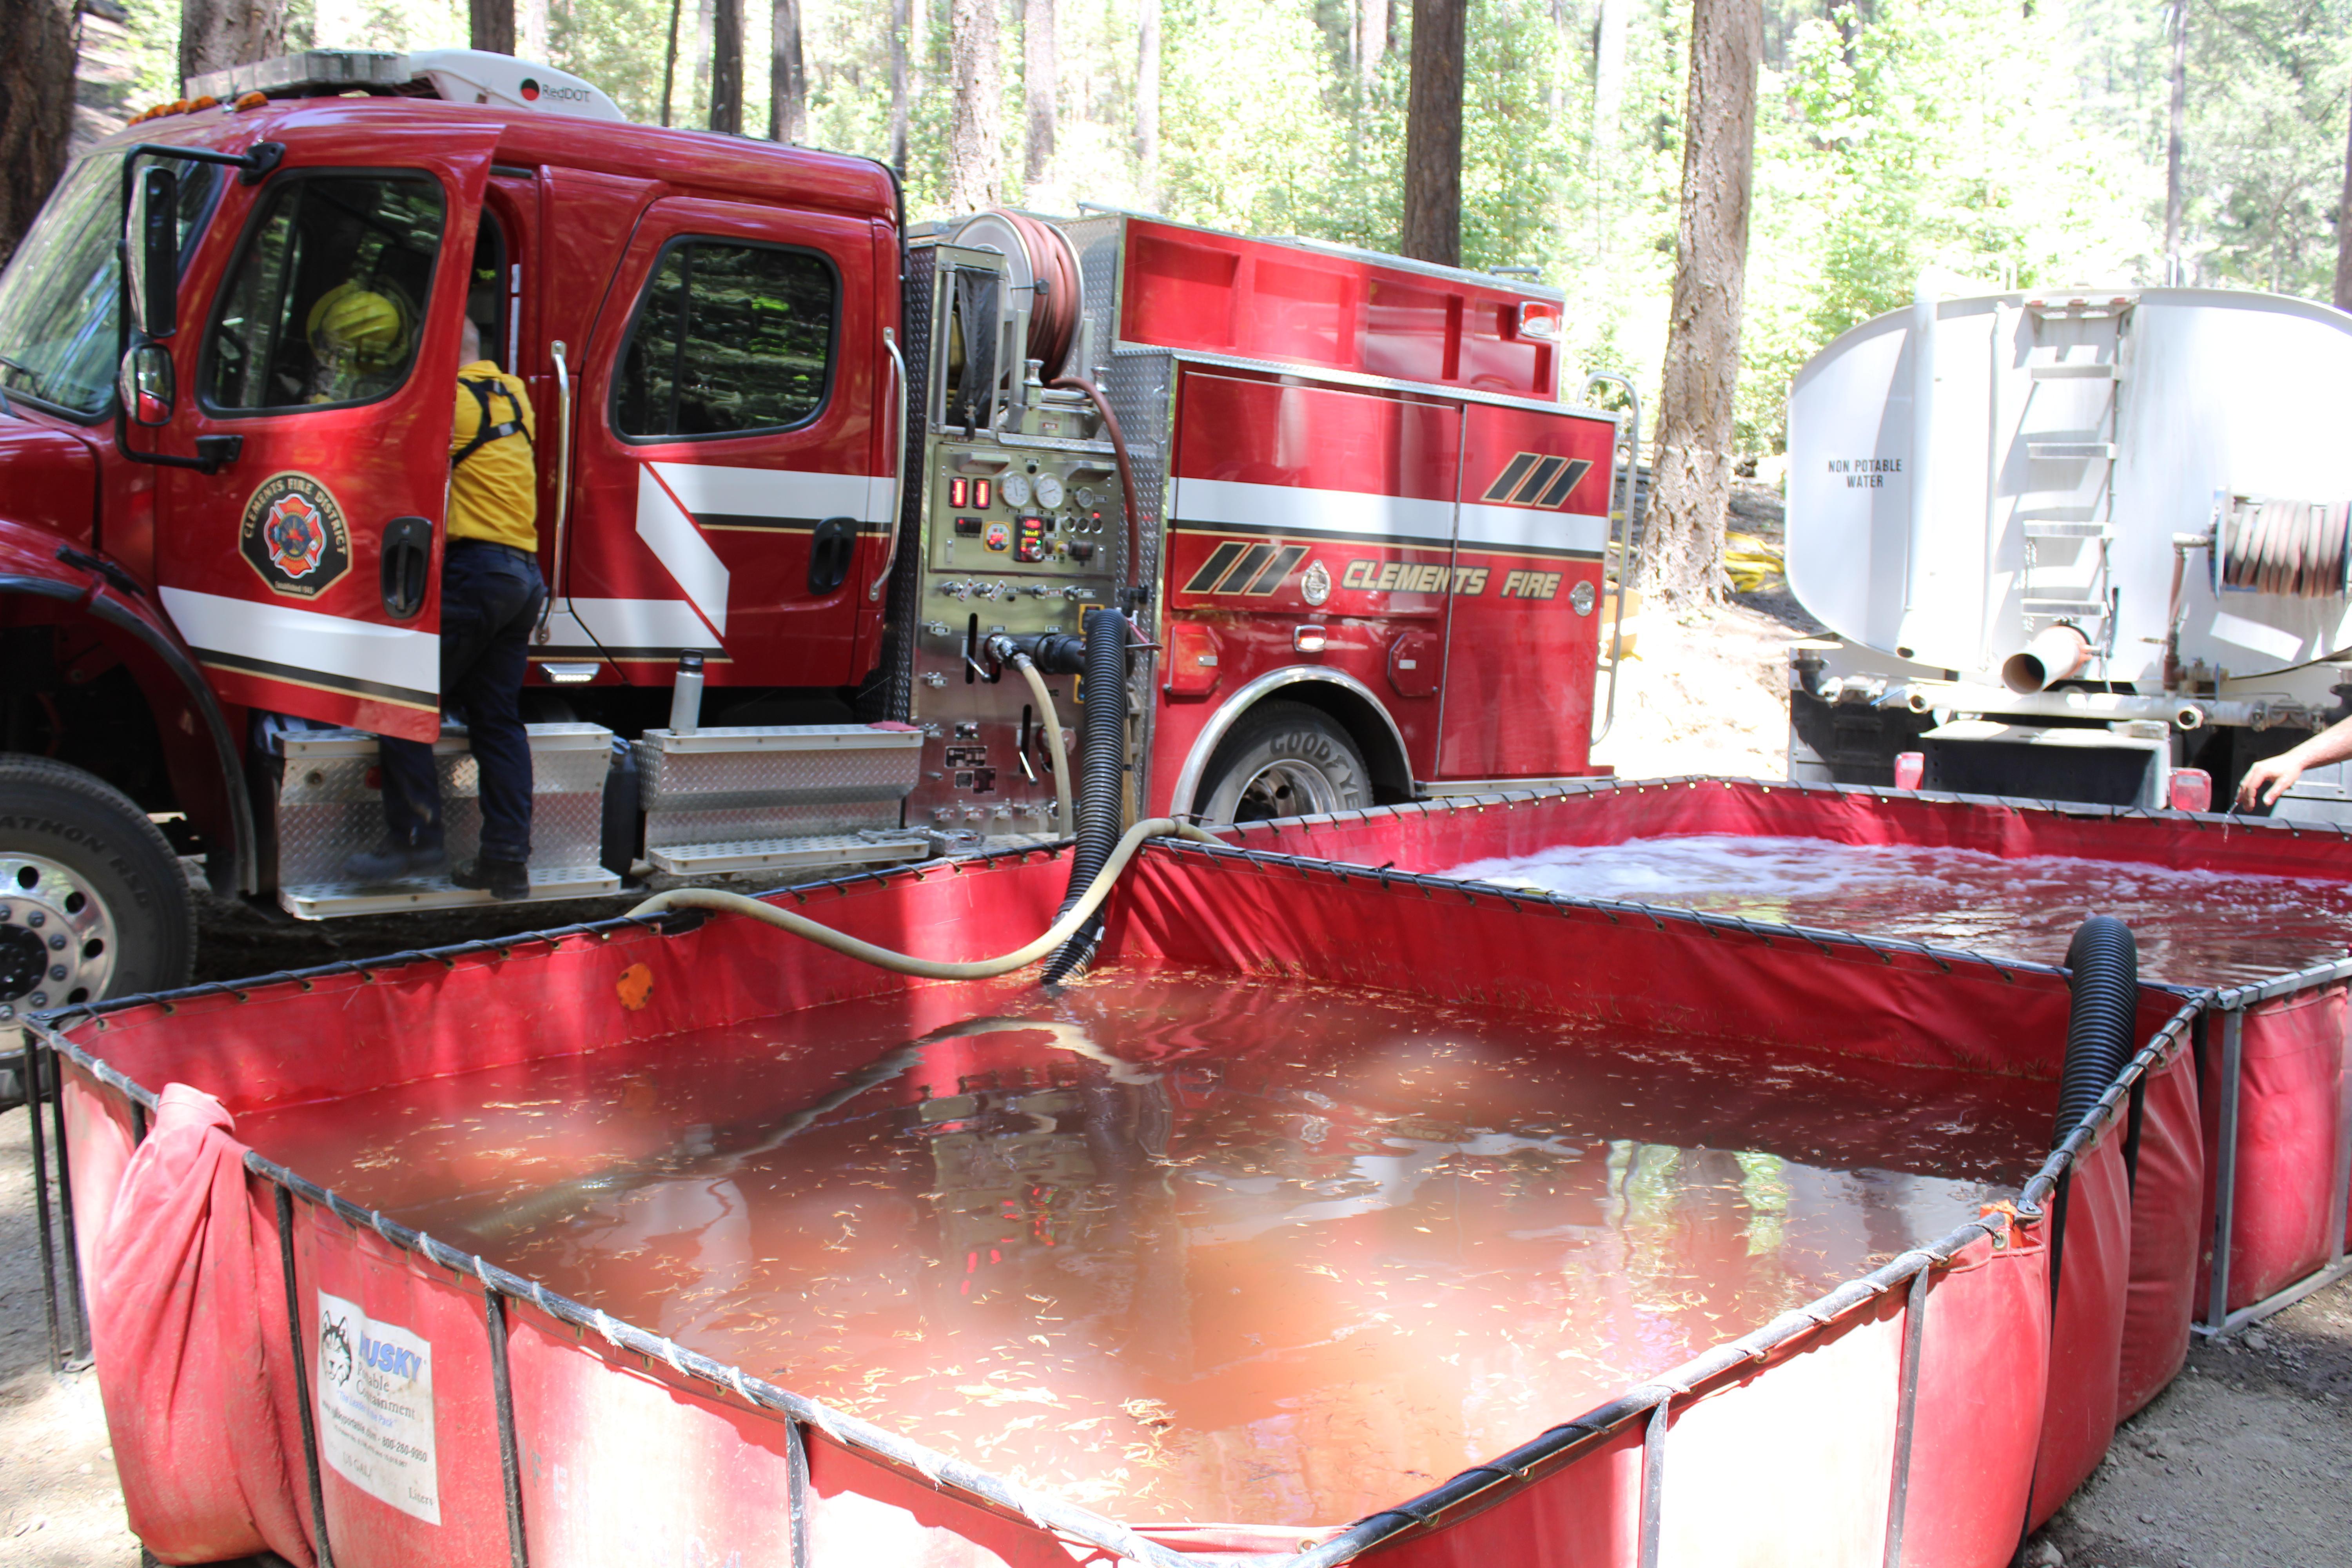 Clements Fire supplying hose line from two portable water tanks